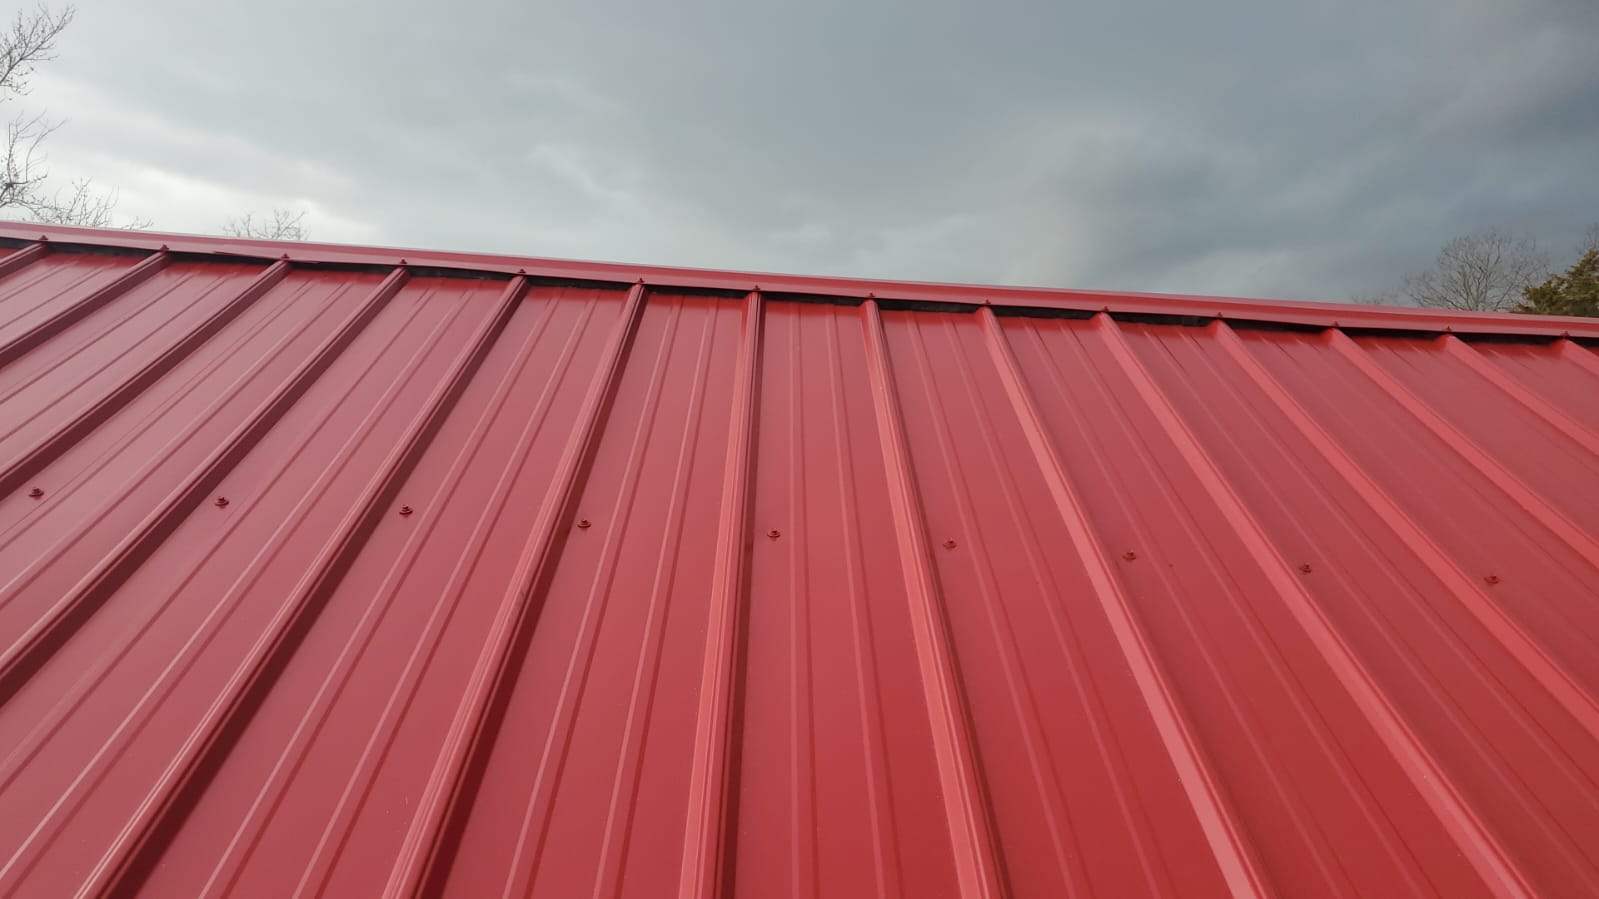 A close-up shot of a standing seam metal roof which was installed on a residential property.